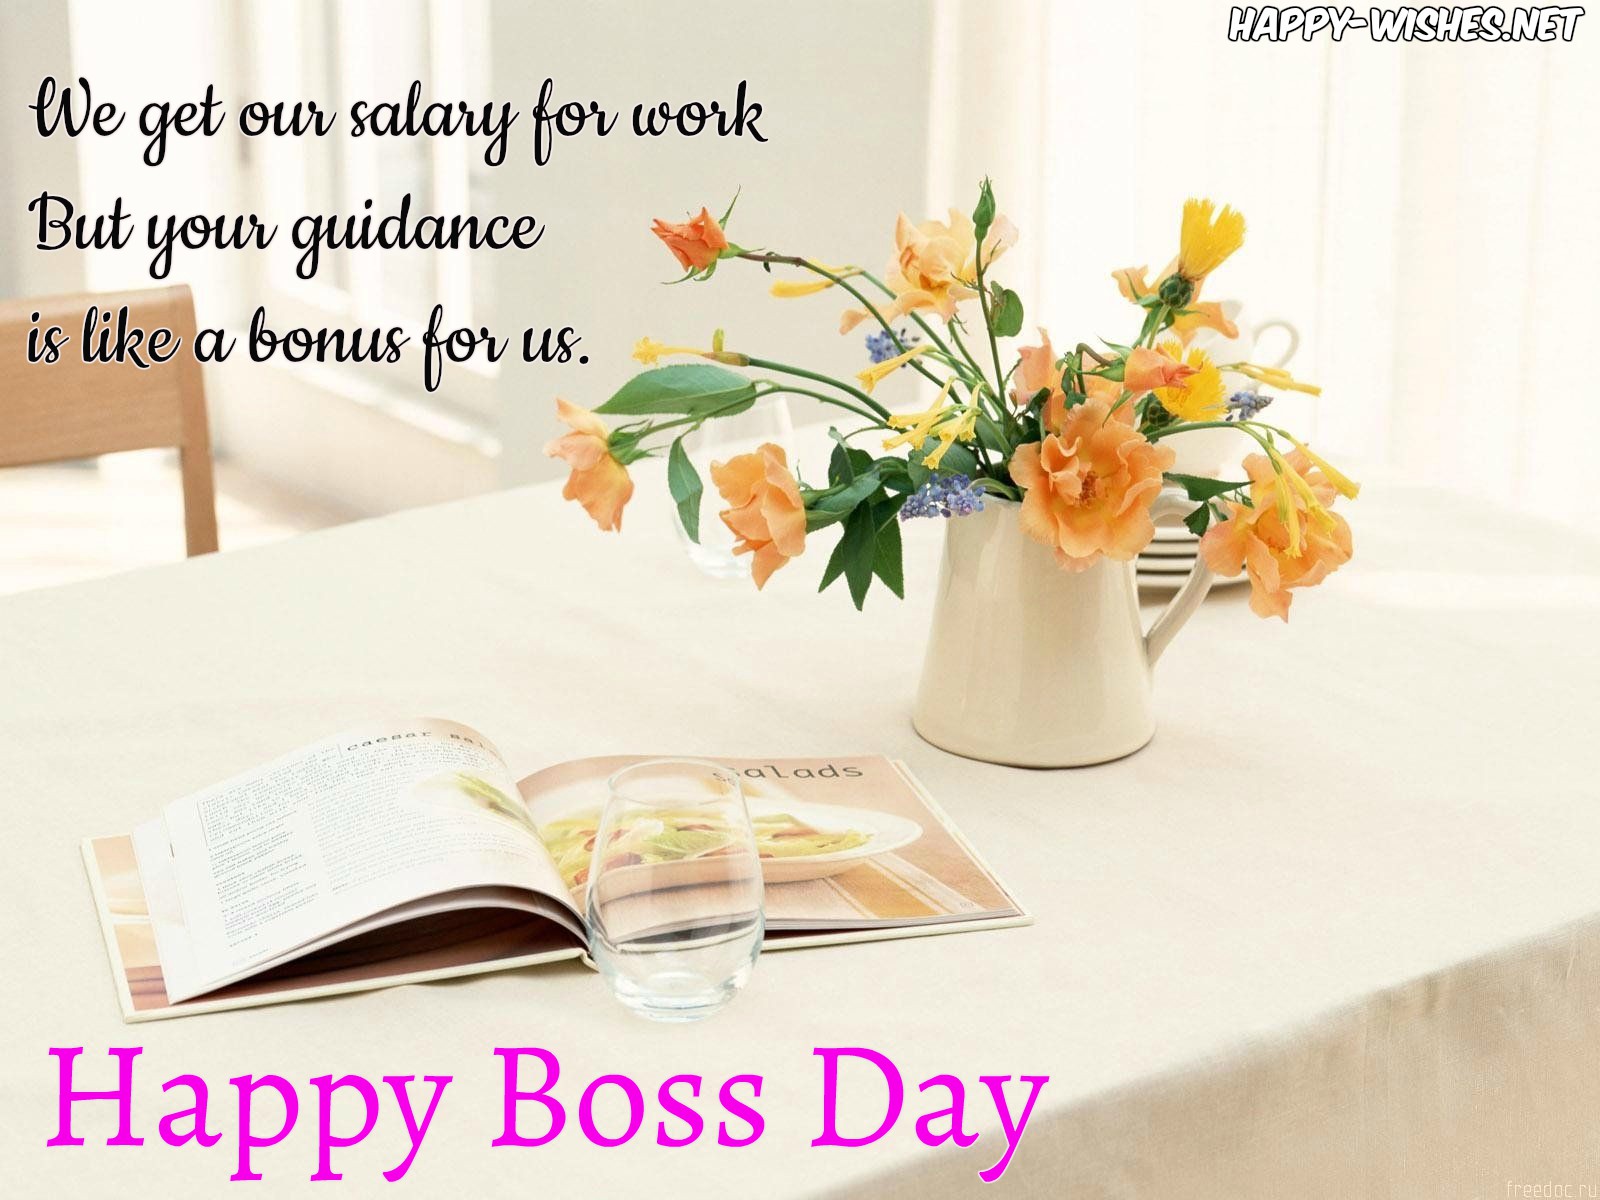 Happy Bosss Day Quotes Wishes Images And Memes